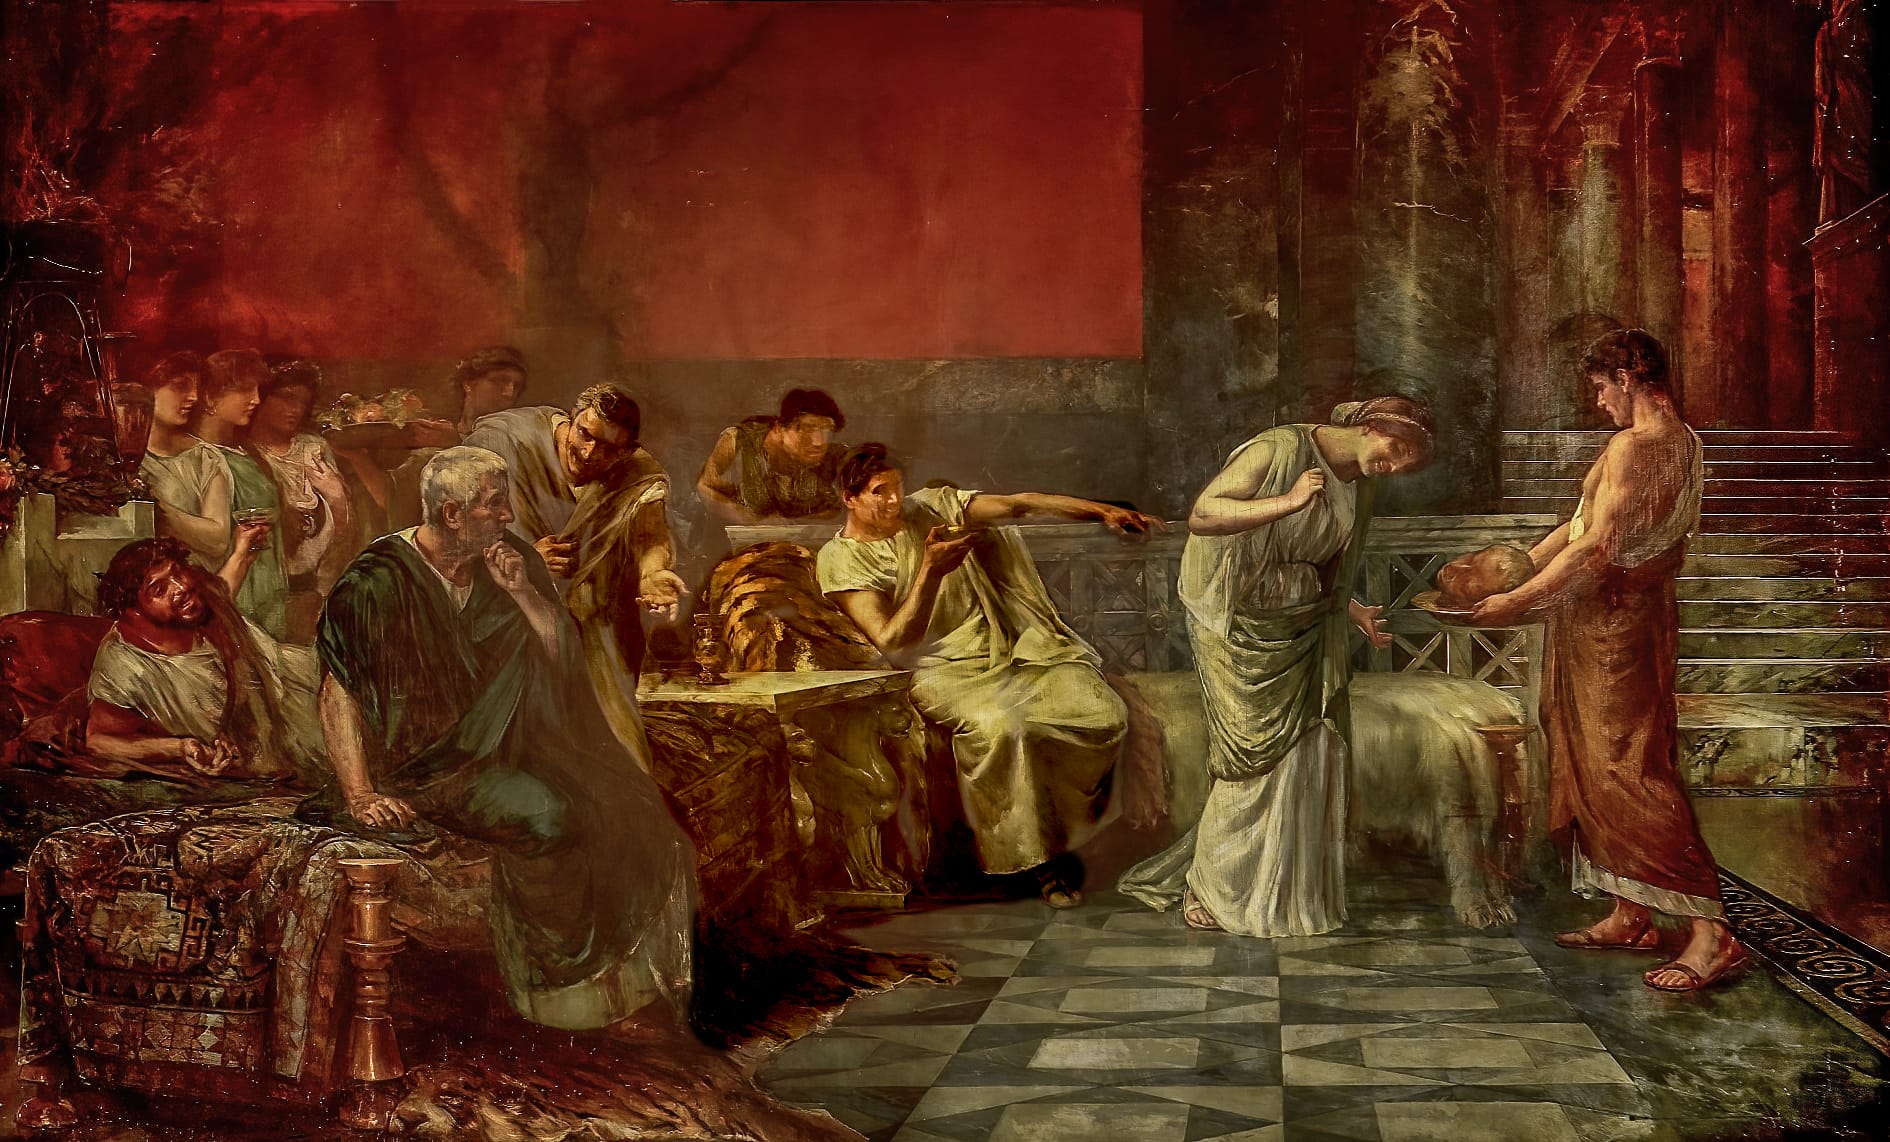 The vengeance of Fulvia by Francisco Maura Y Montaner, 1888 depicting Fulvia inspecting the severed head of Cicero